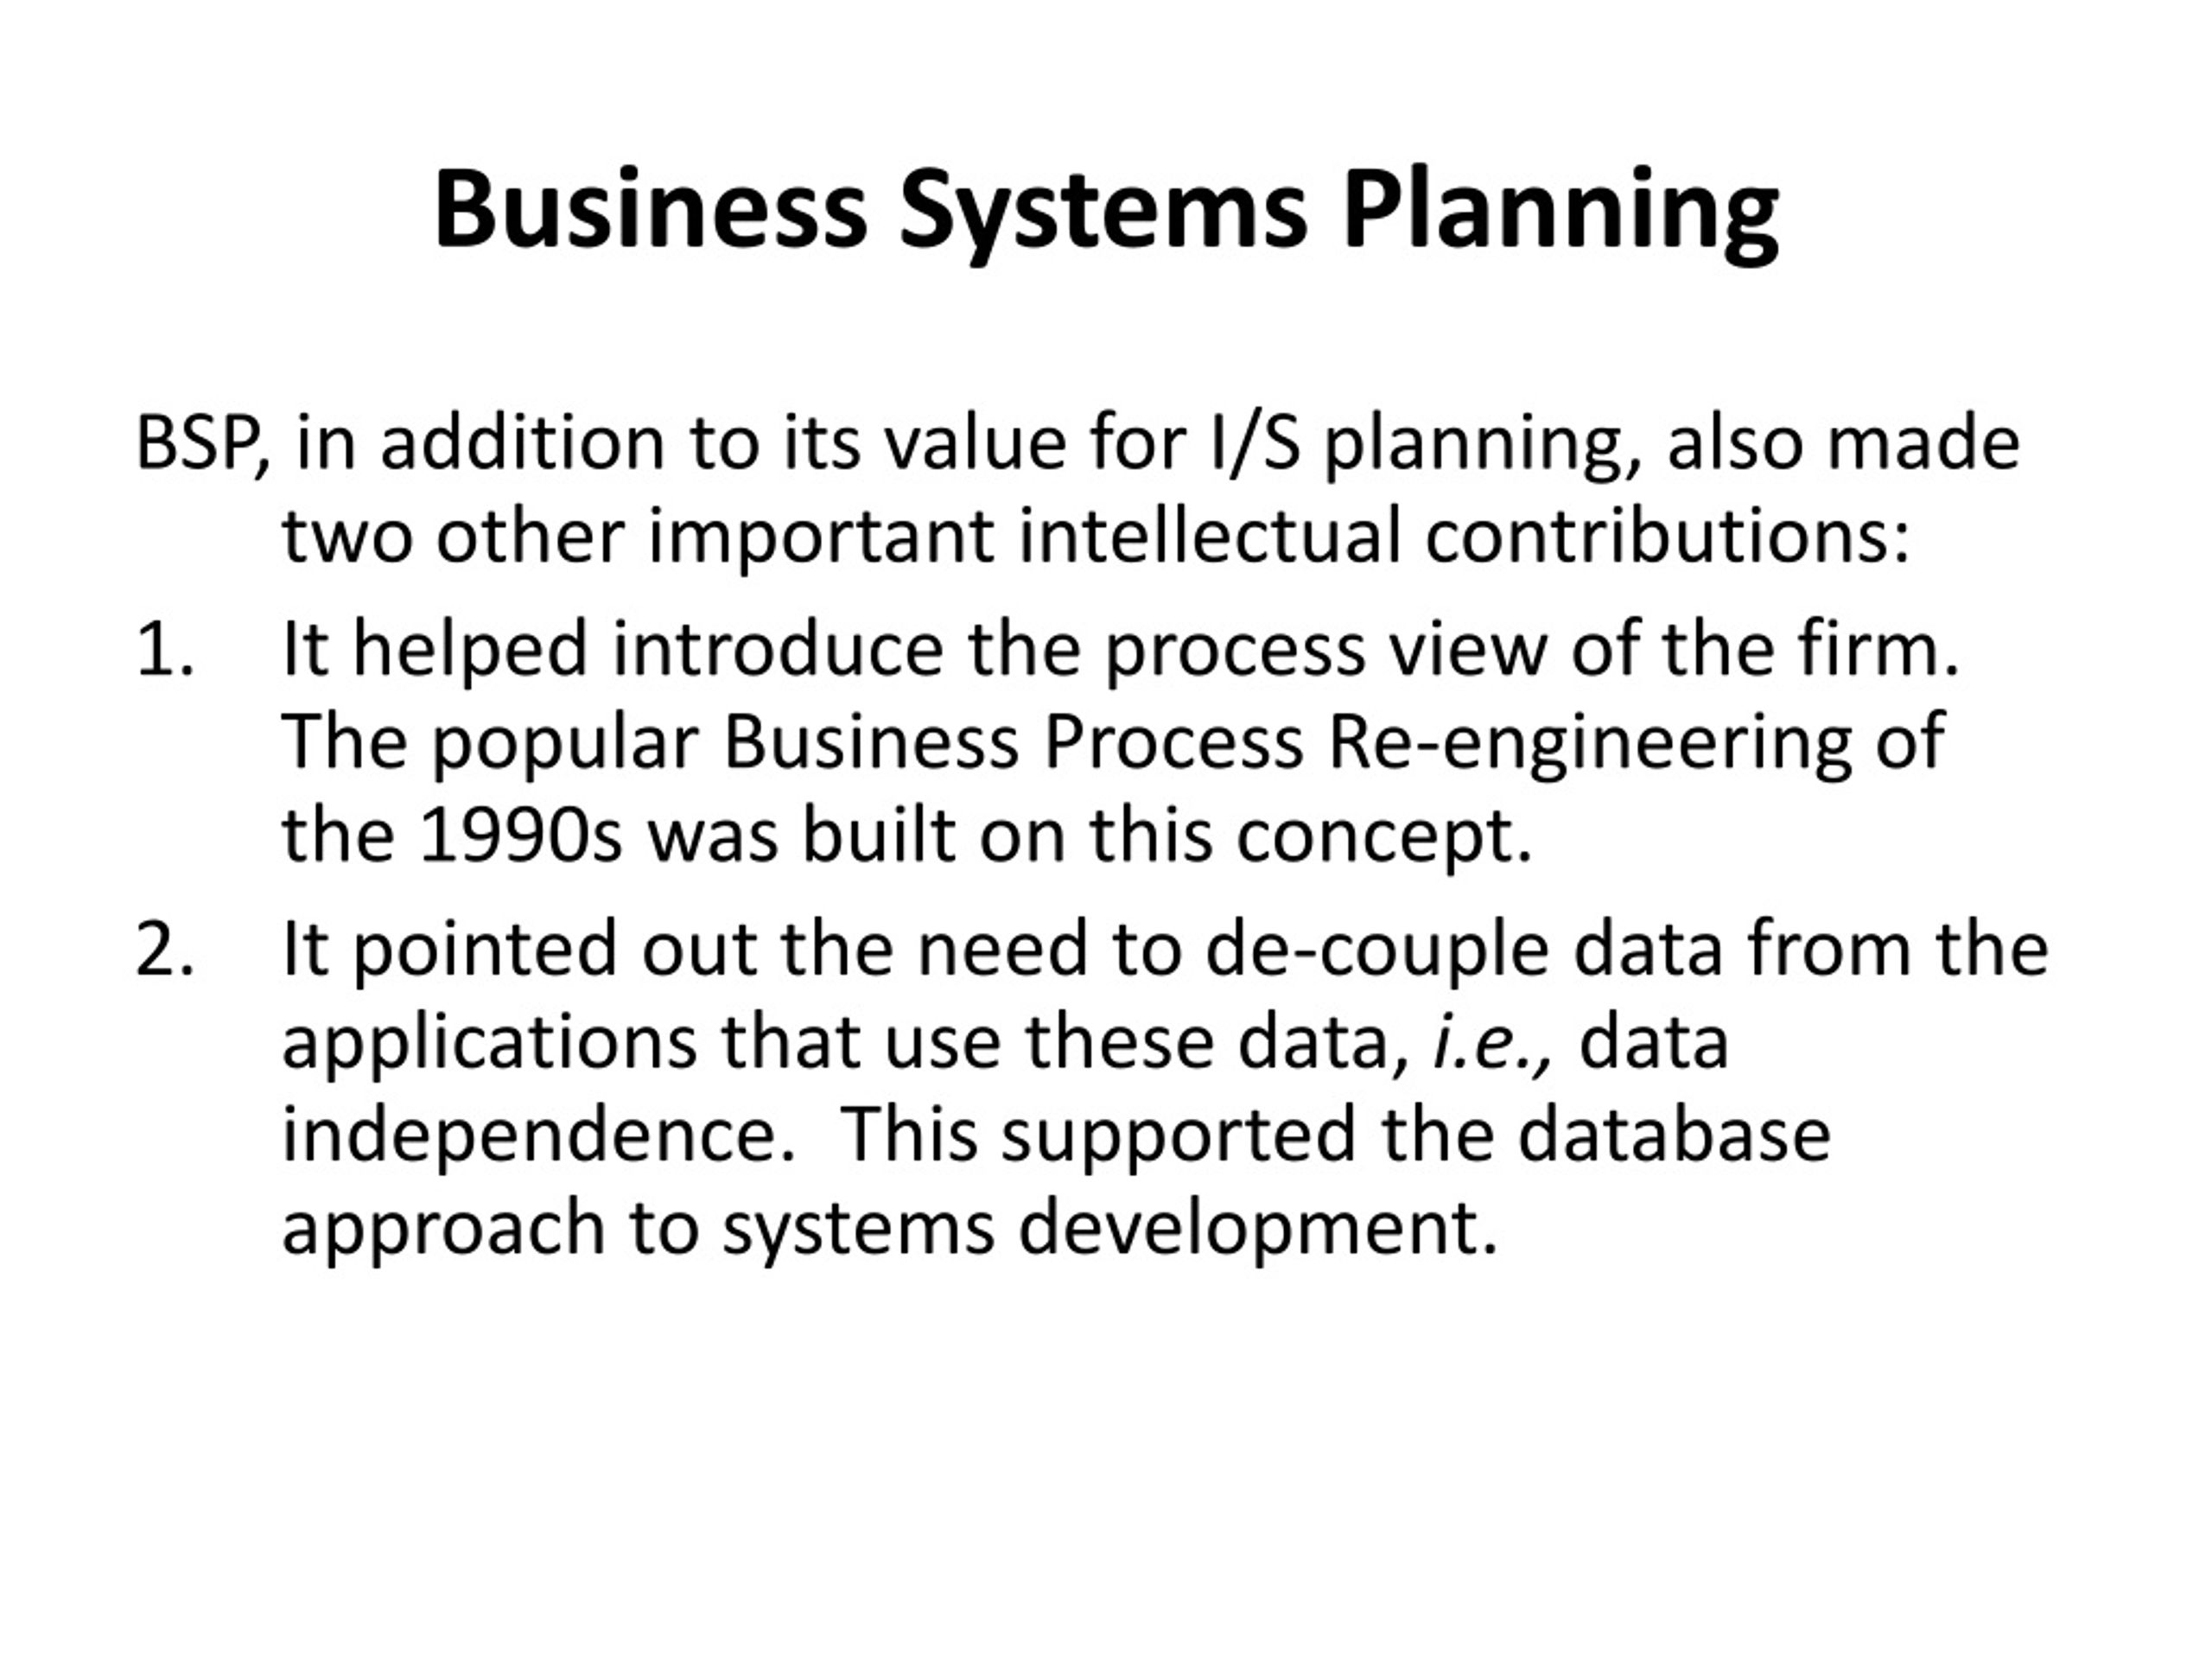 explain business systems planning (bsp)